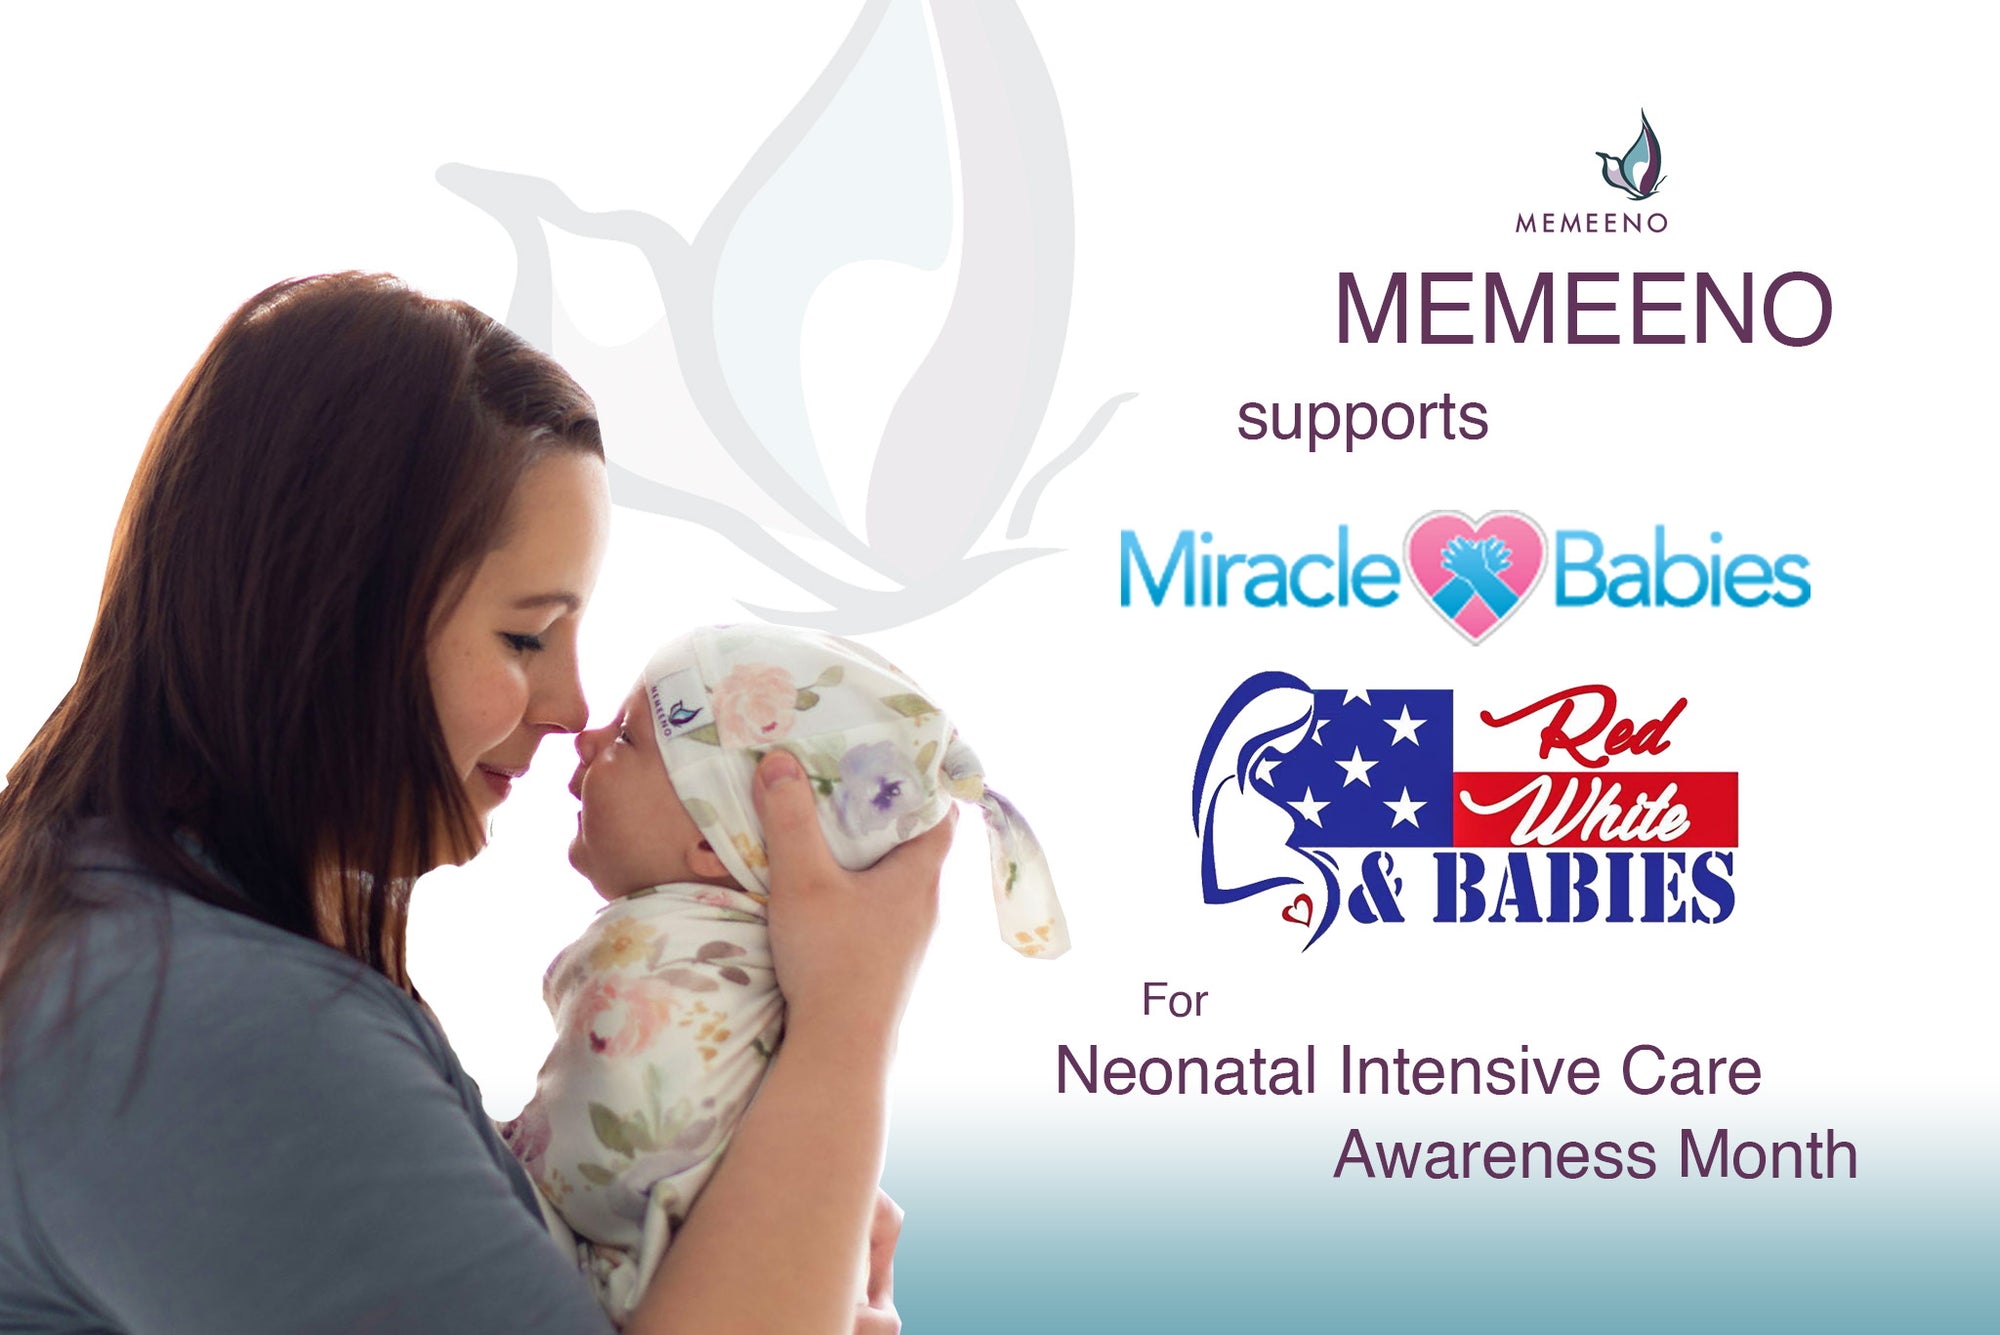 MEMEENO support Miracle Babies, Red White Babies